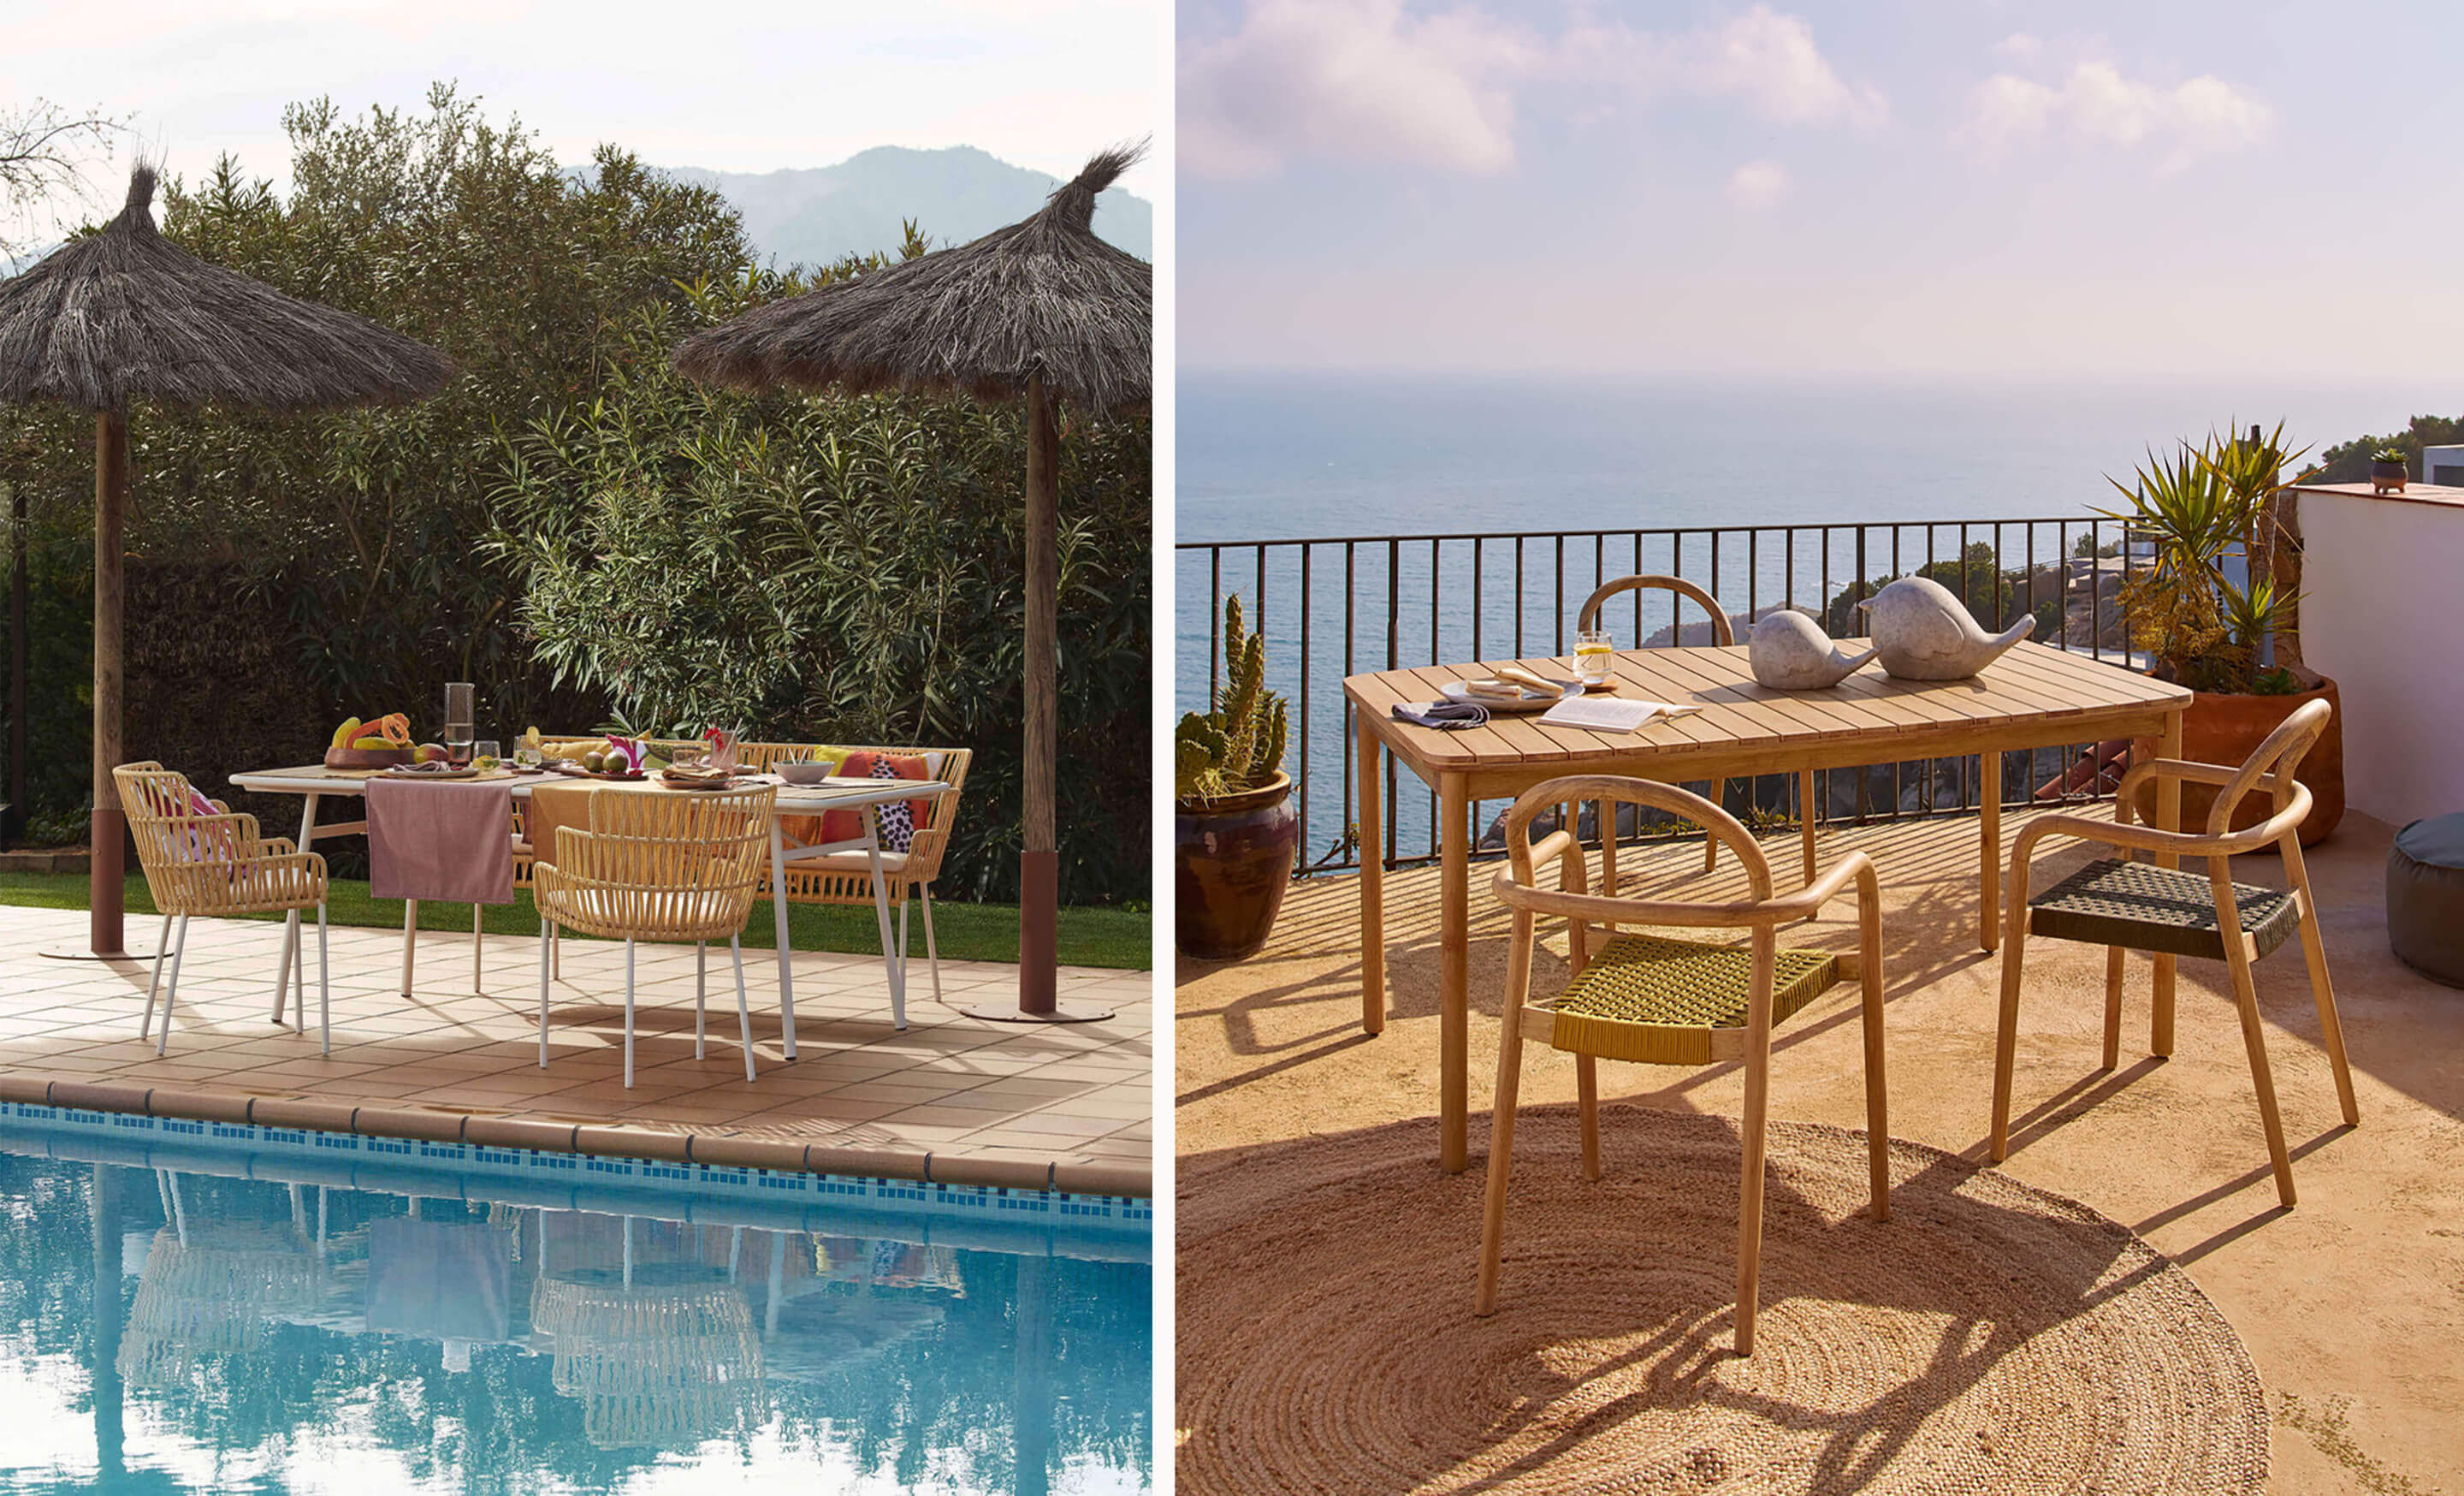 Enjoy your alfresco spaces and soak in the sun in style with the new and inviting selection of outdoor furniture by Laforma, including outdoor seating, tables, dining chairs, and lounge chairs.